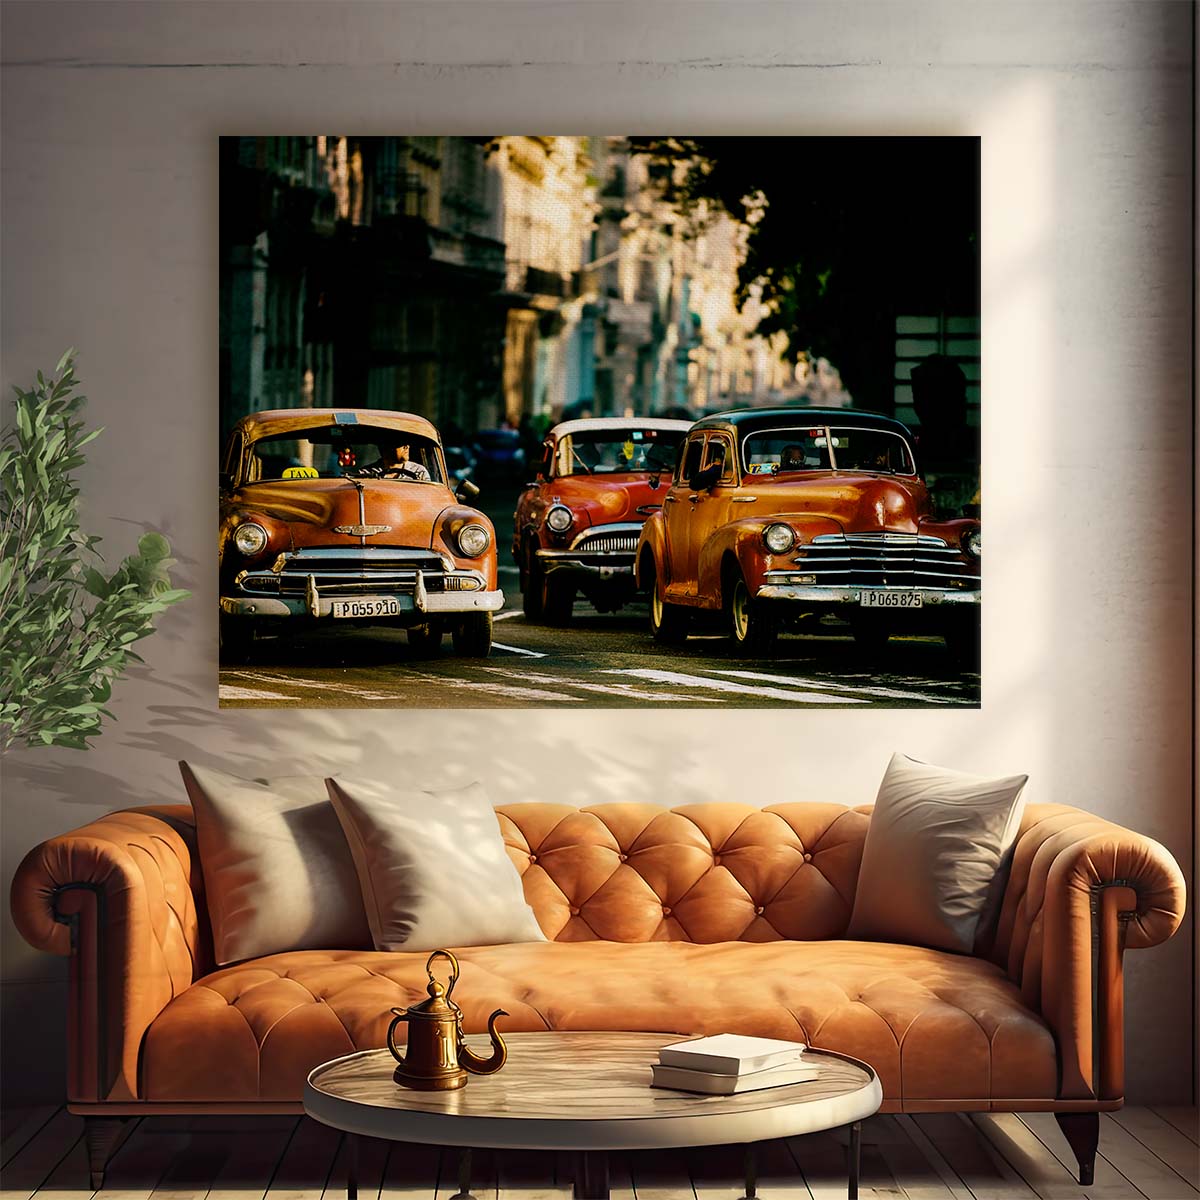 Vintage Classic Cars & Street Lamps in Havana Photography Wall Art